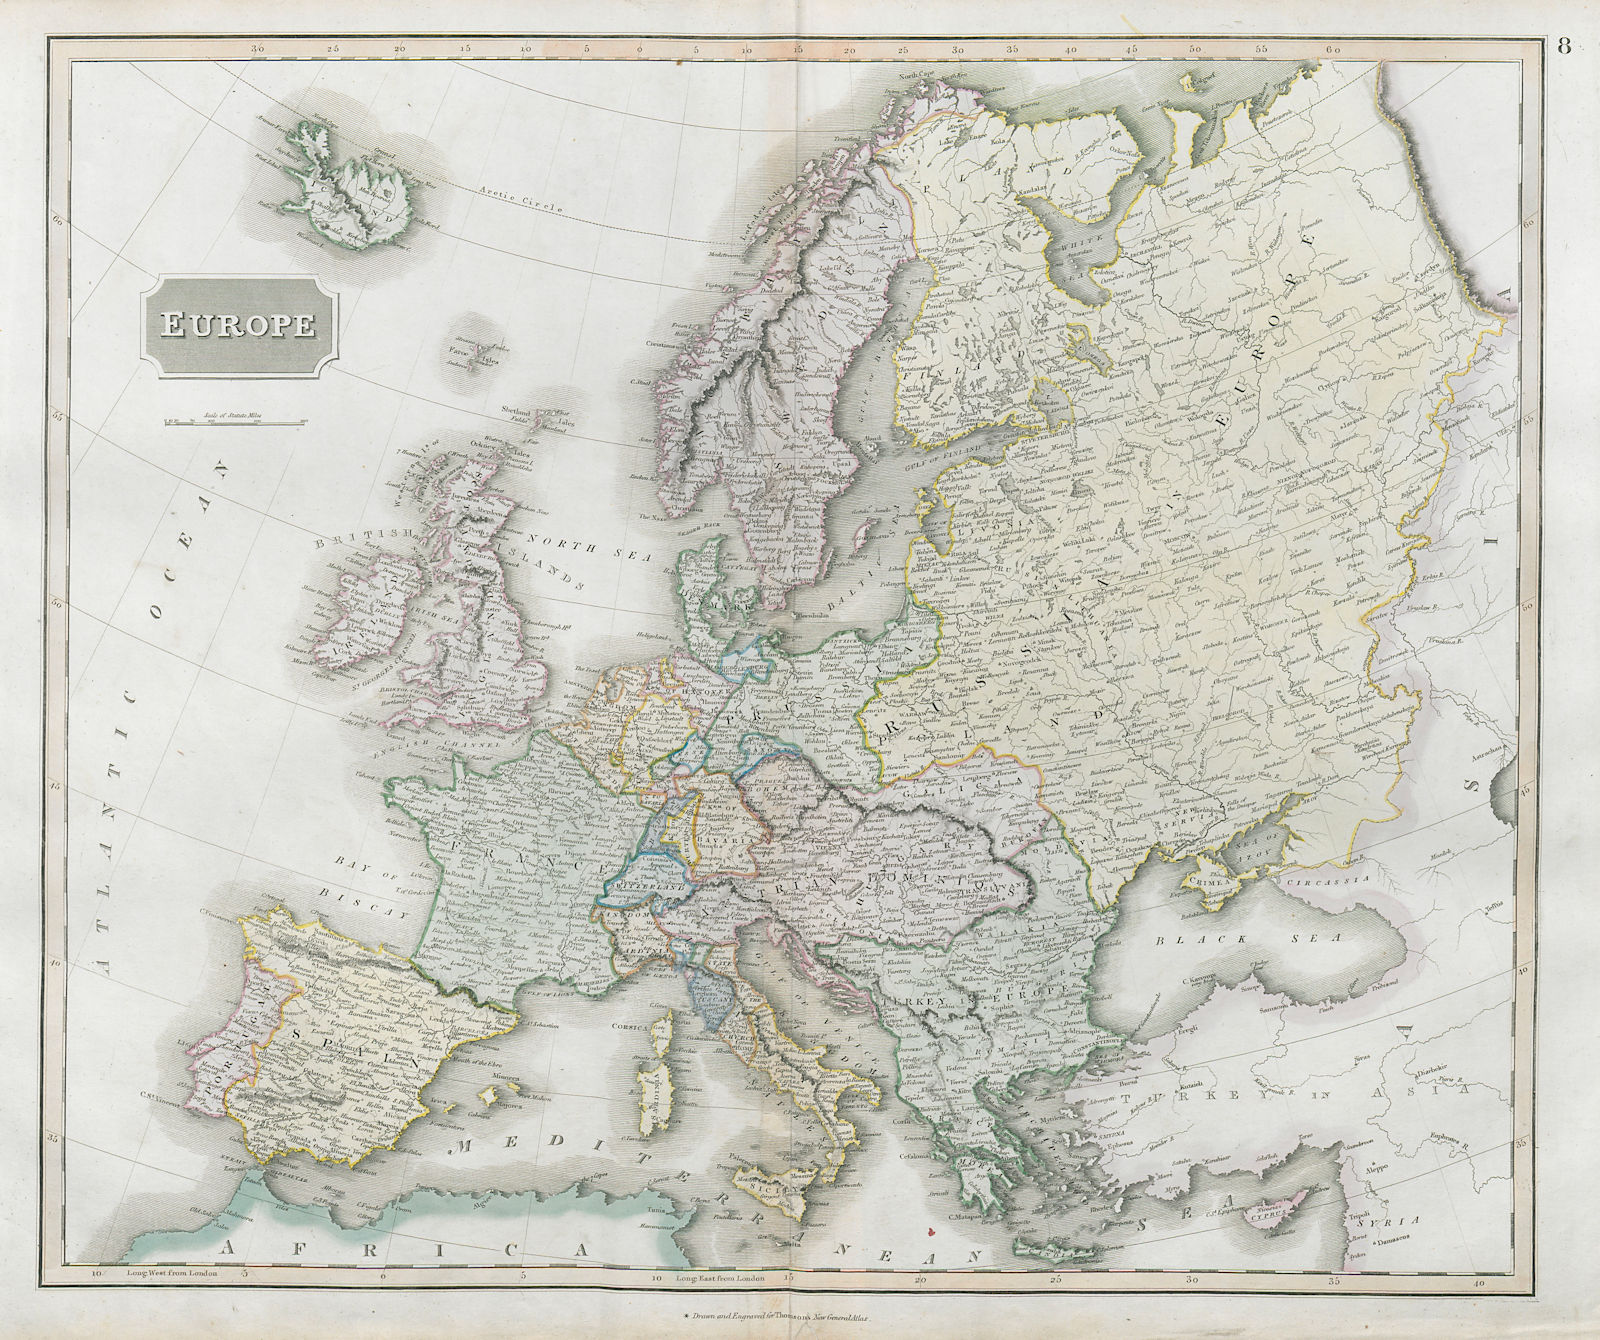 Associate Product Europe. Unified Benelux. Switzerland includes Haute-Savoie. THOMSON 1830 map